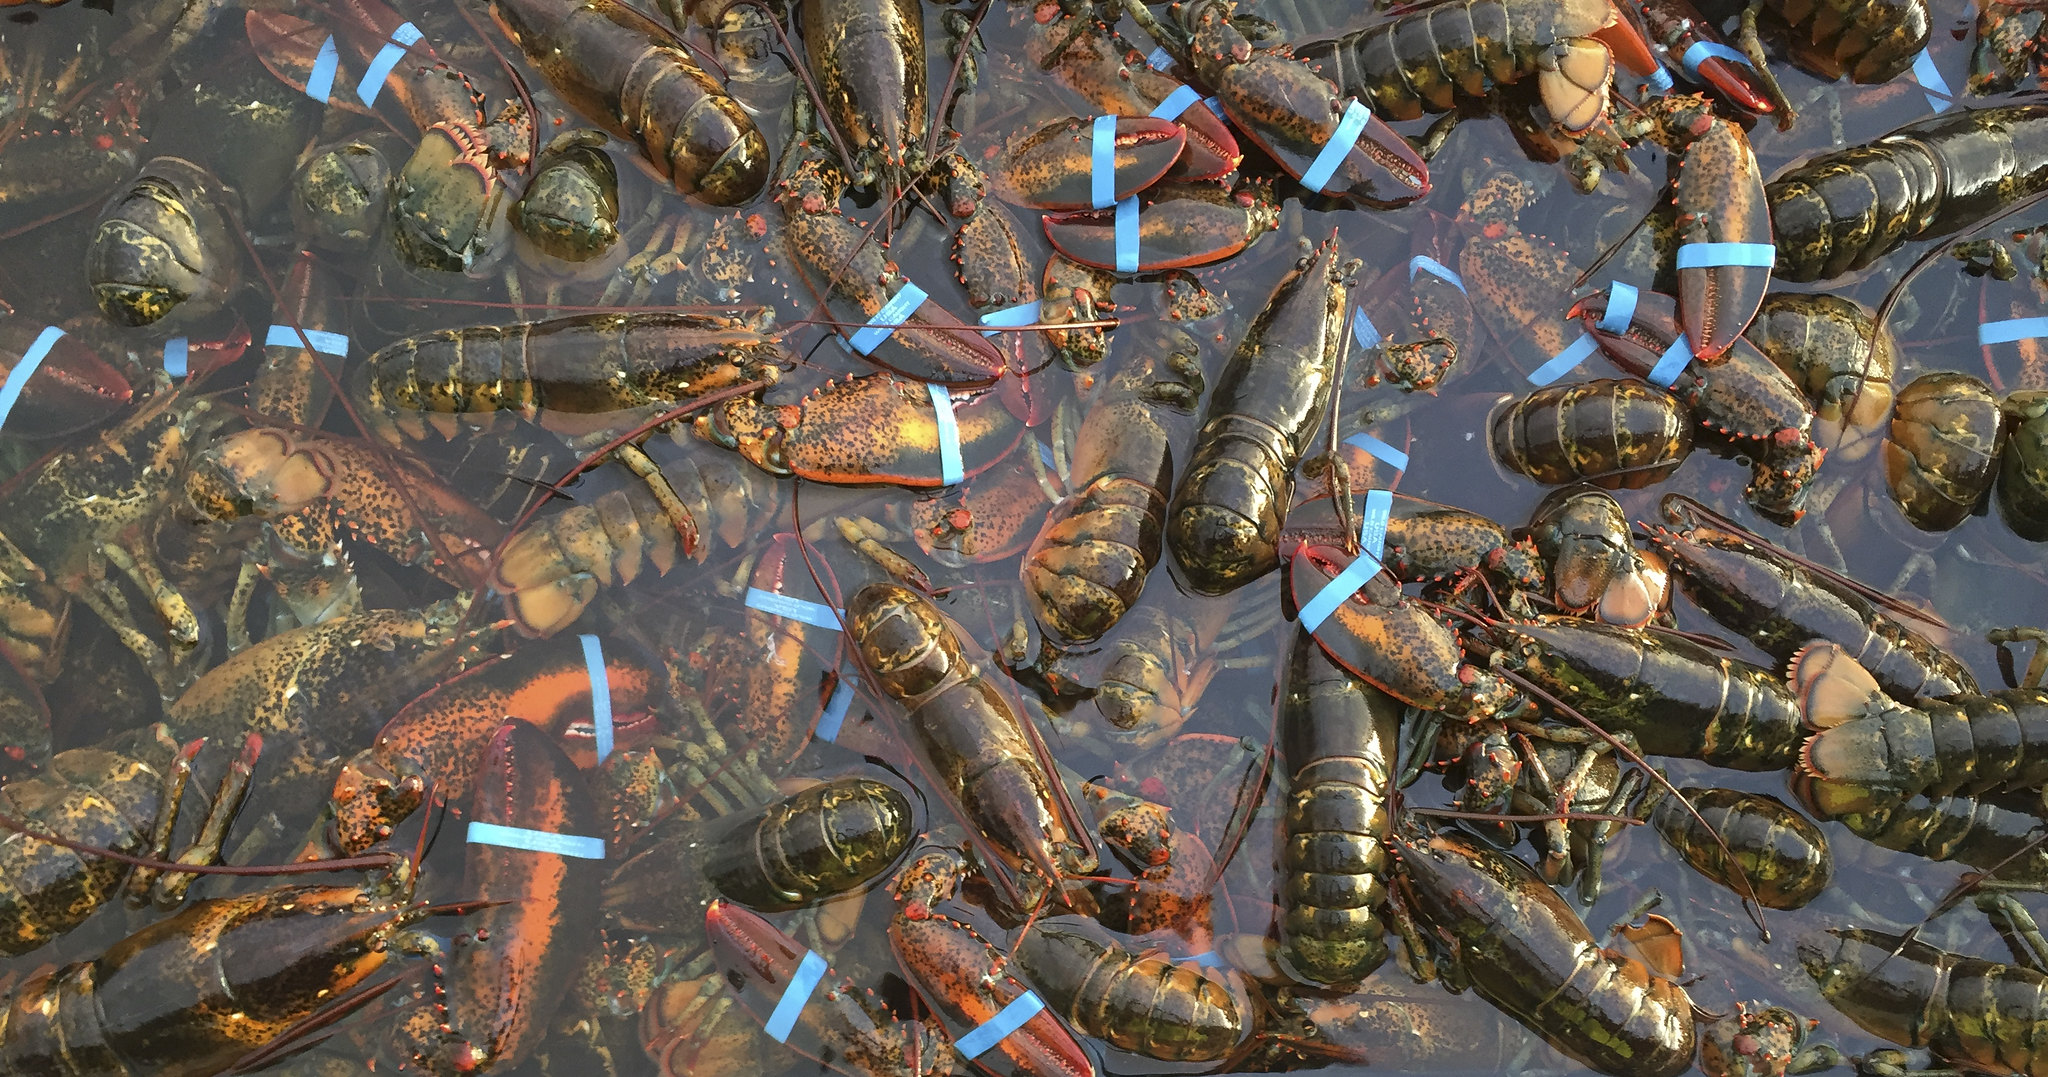 Dozens of American Lobsters in the water with their claws banded